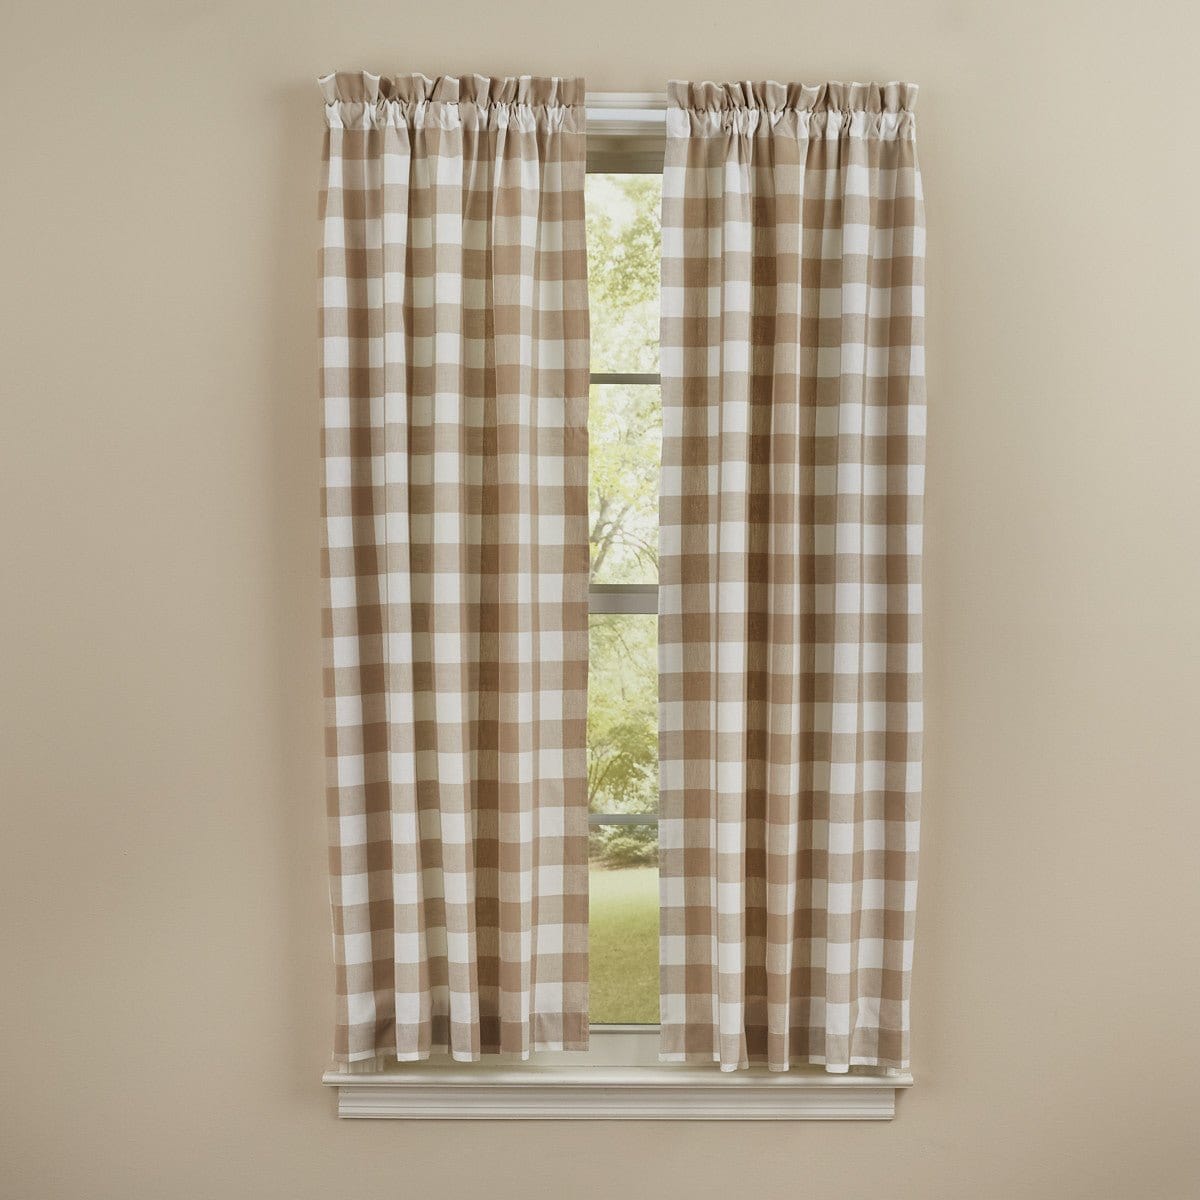 Wicklow Check in Natural Panel Pair With Tie Backs 63" Long Unlined-Park Designs-The Village Merchant